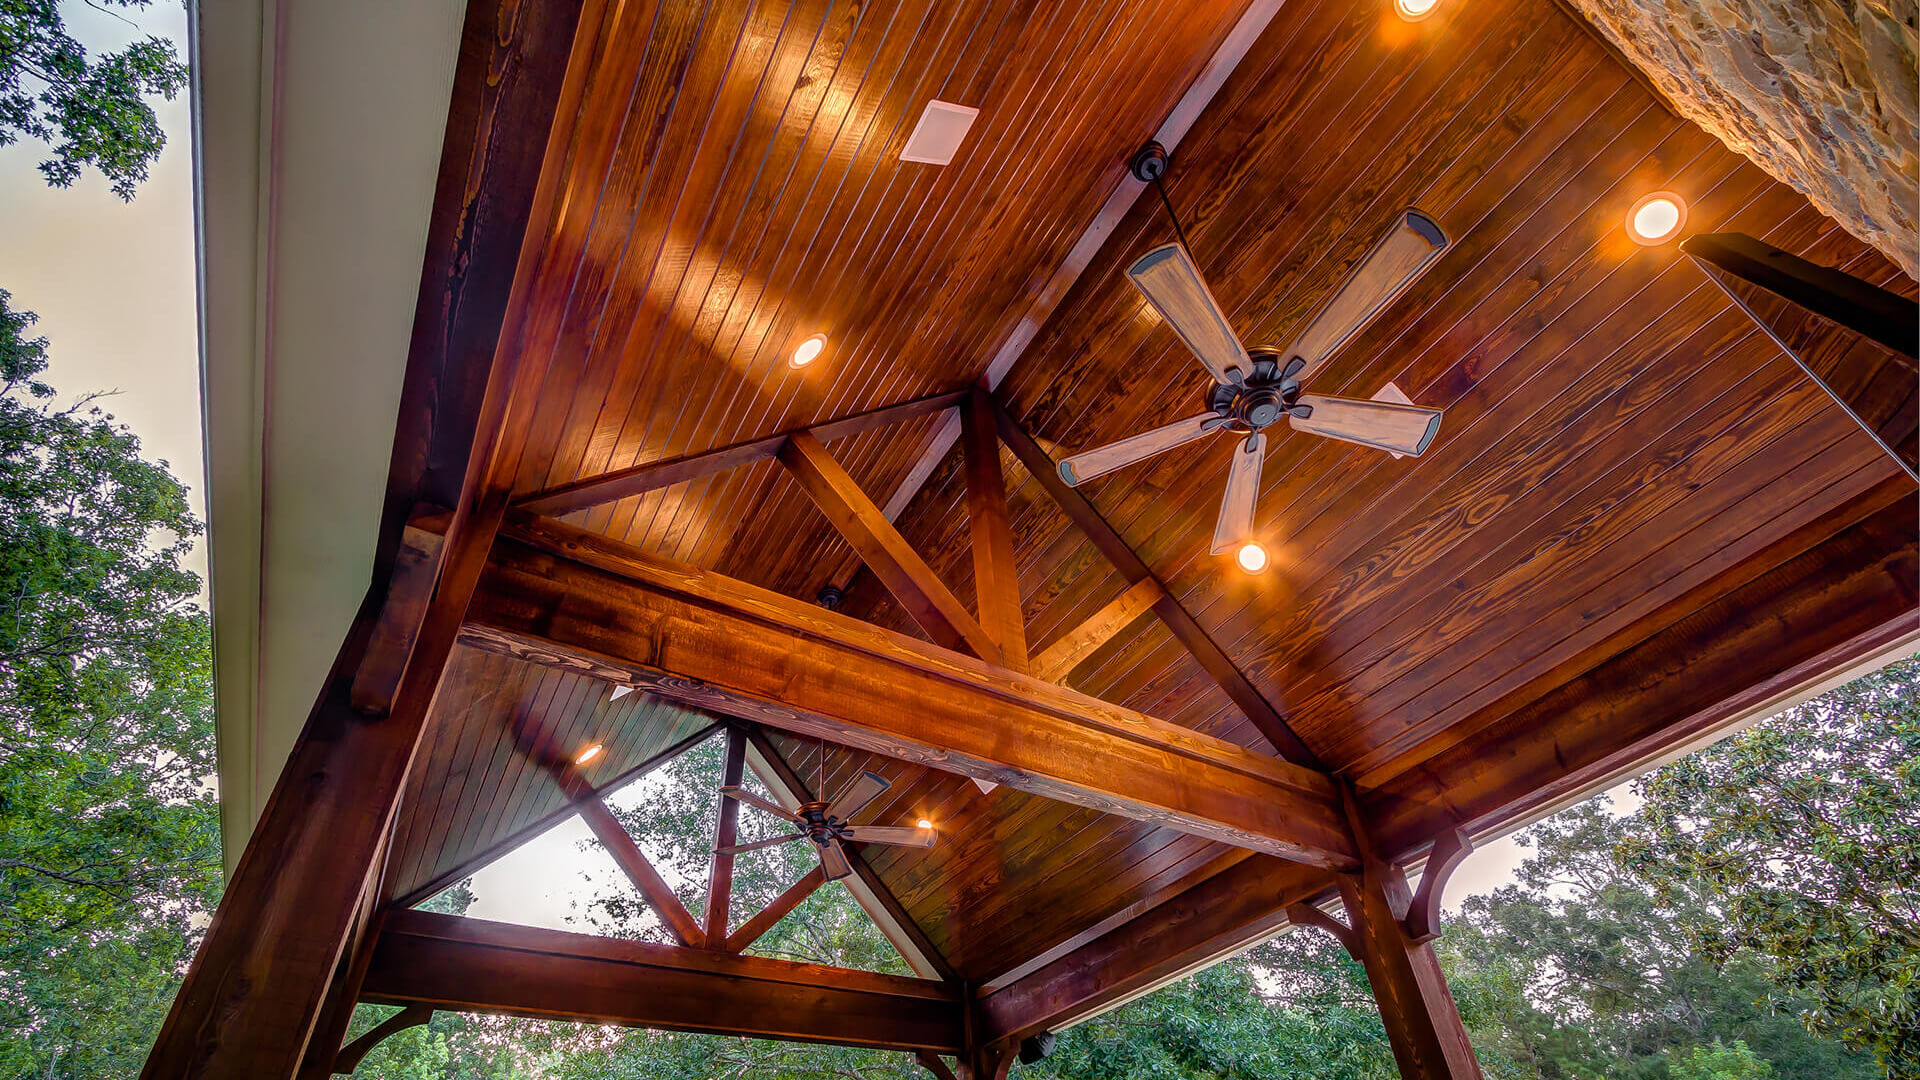 Wood Ceiling of a Patio Cover